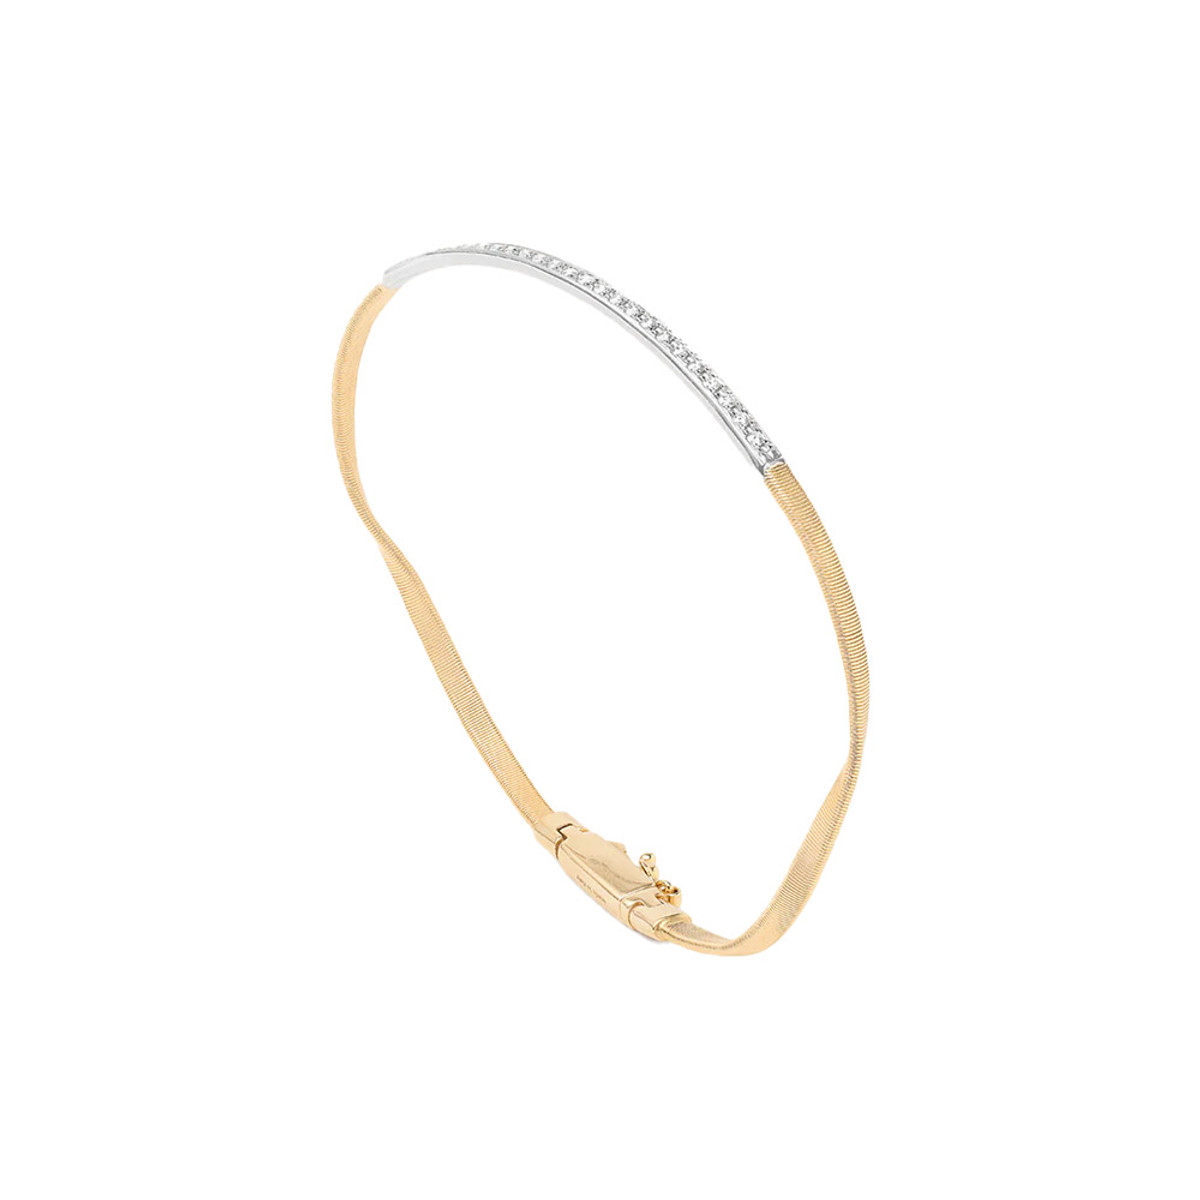 Marco Bicego Marrakech 18K Yellow Gold Coil Necklace with Diamond Bar-61190